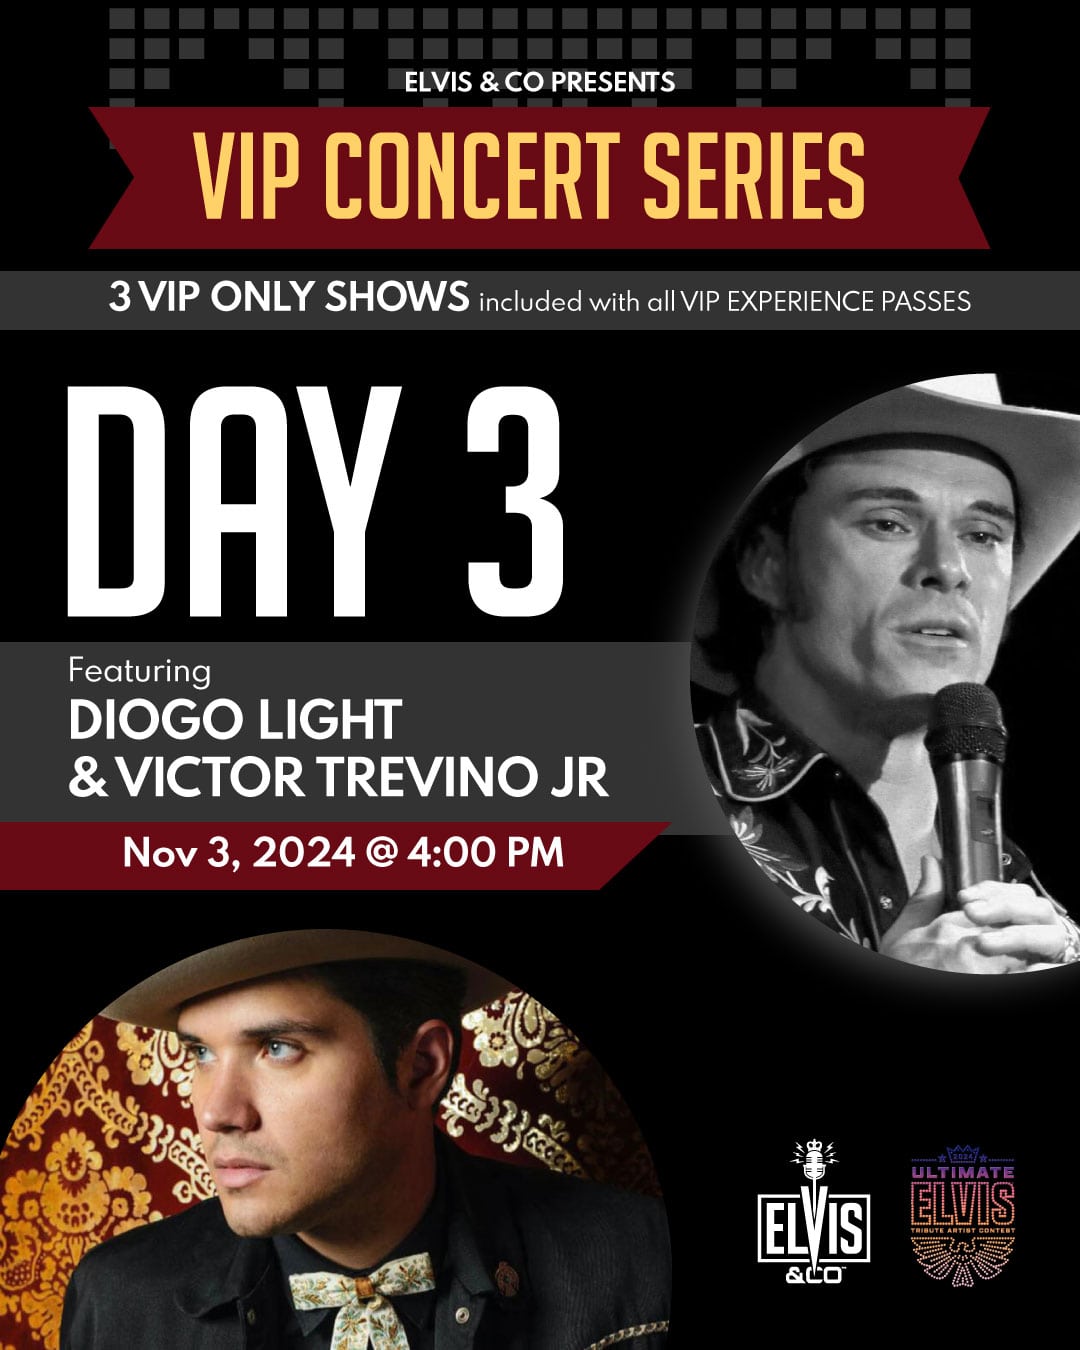 VIP Concert 3 - Victor Trevino Jr and Diogo Light